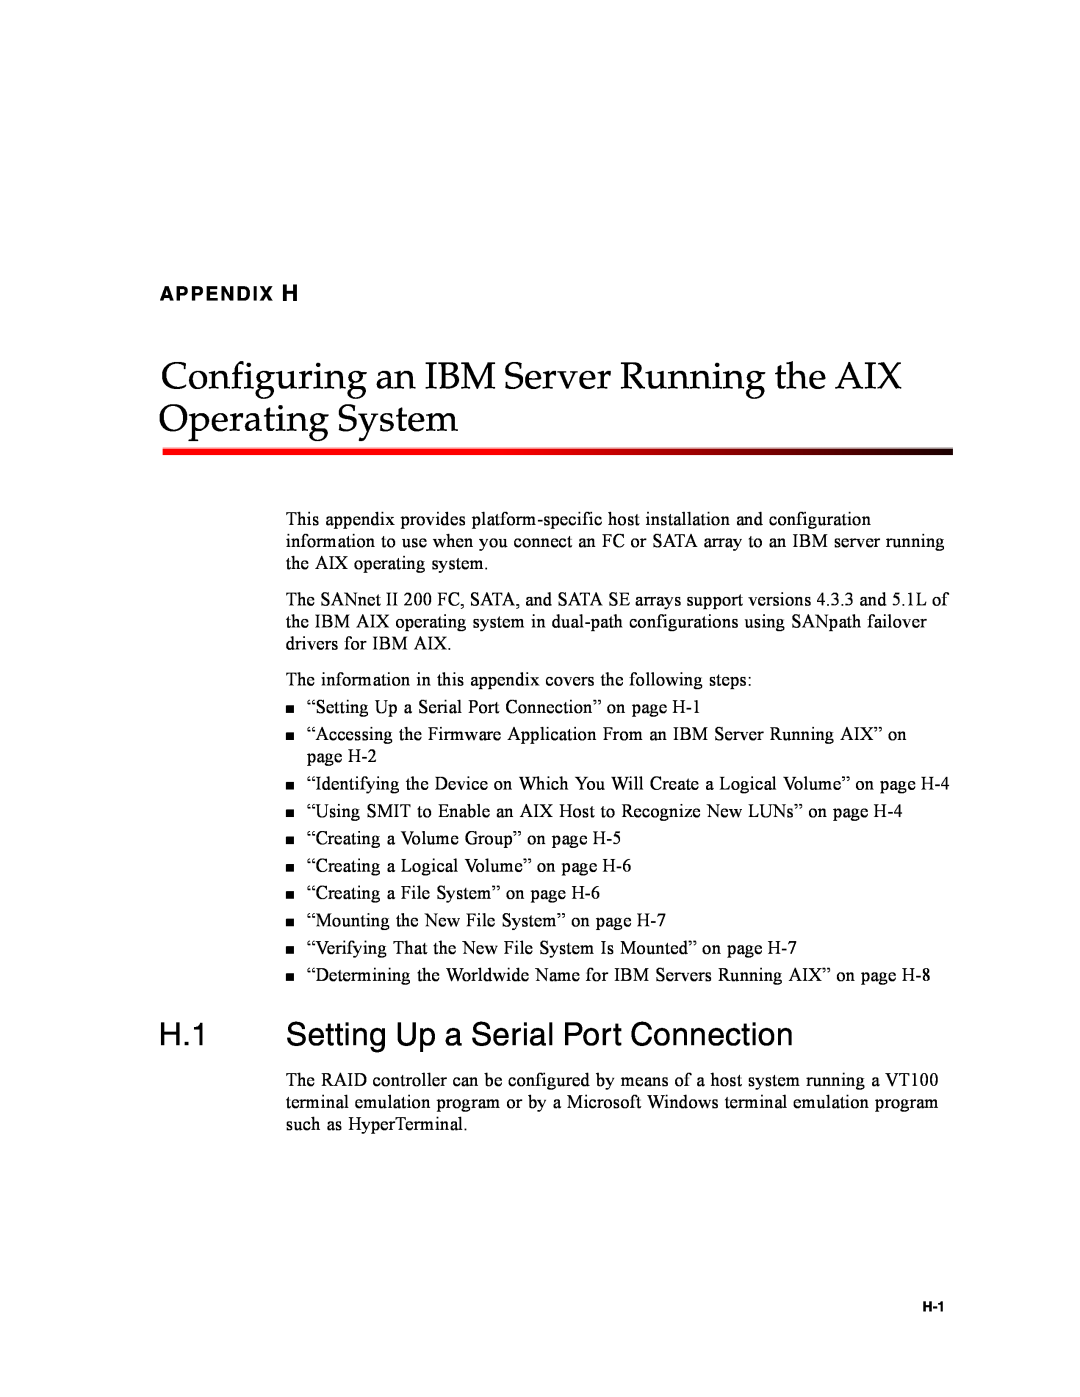 Dot Hill Systems II 200 FC service manual Configuring an IBM Server Running the AIX Operating System, Appendix H 